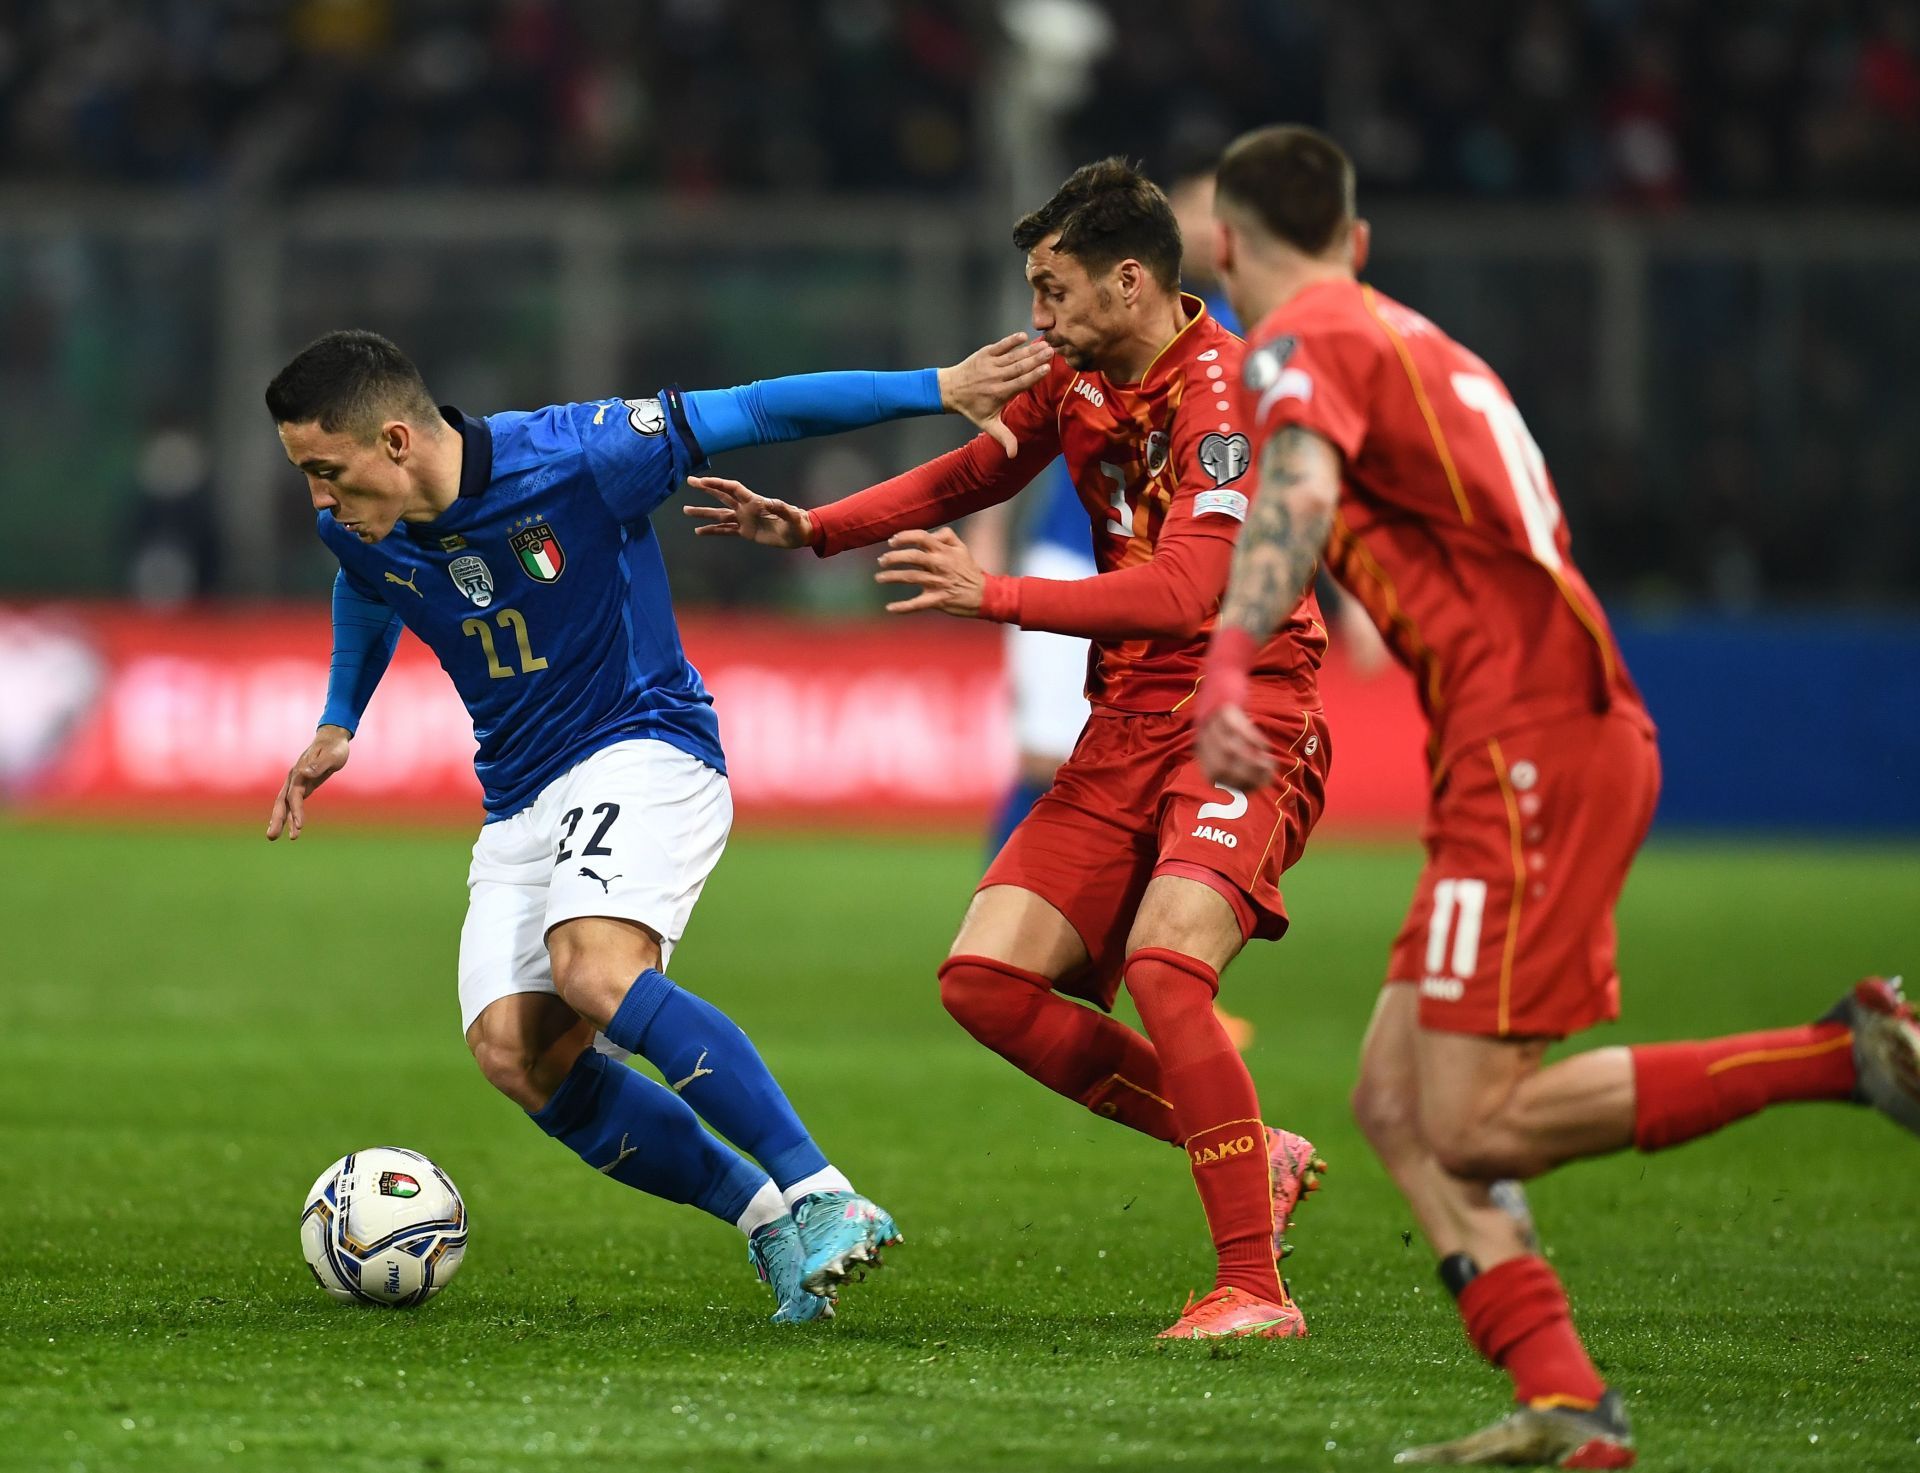 Italy surprisingly got eliminated by North Macedonia on Thursday night